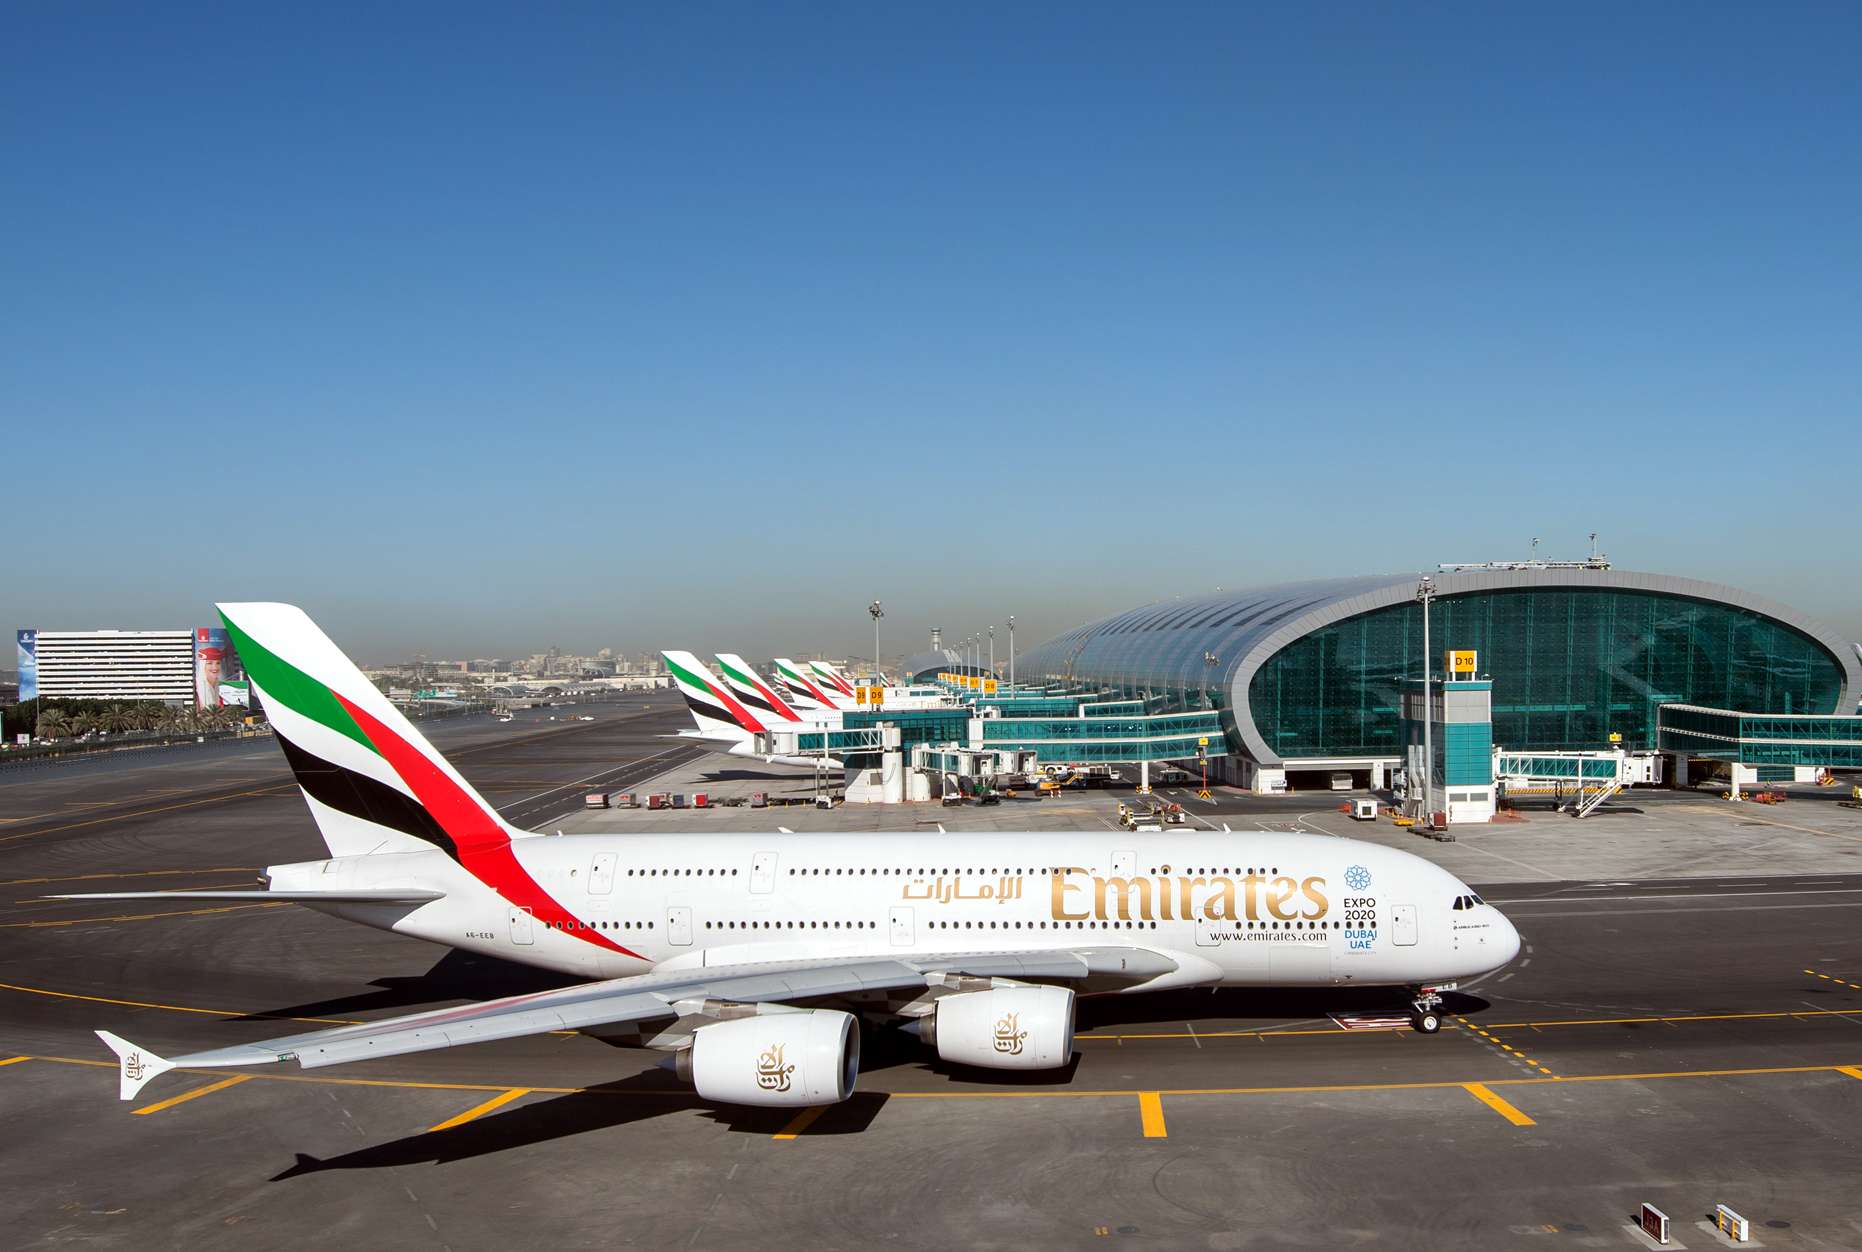 Emirates Airbus A380 aircraft in front of concourse A at Dubai Airport